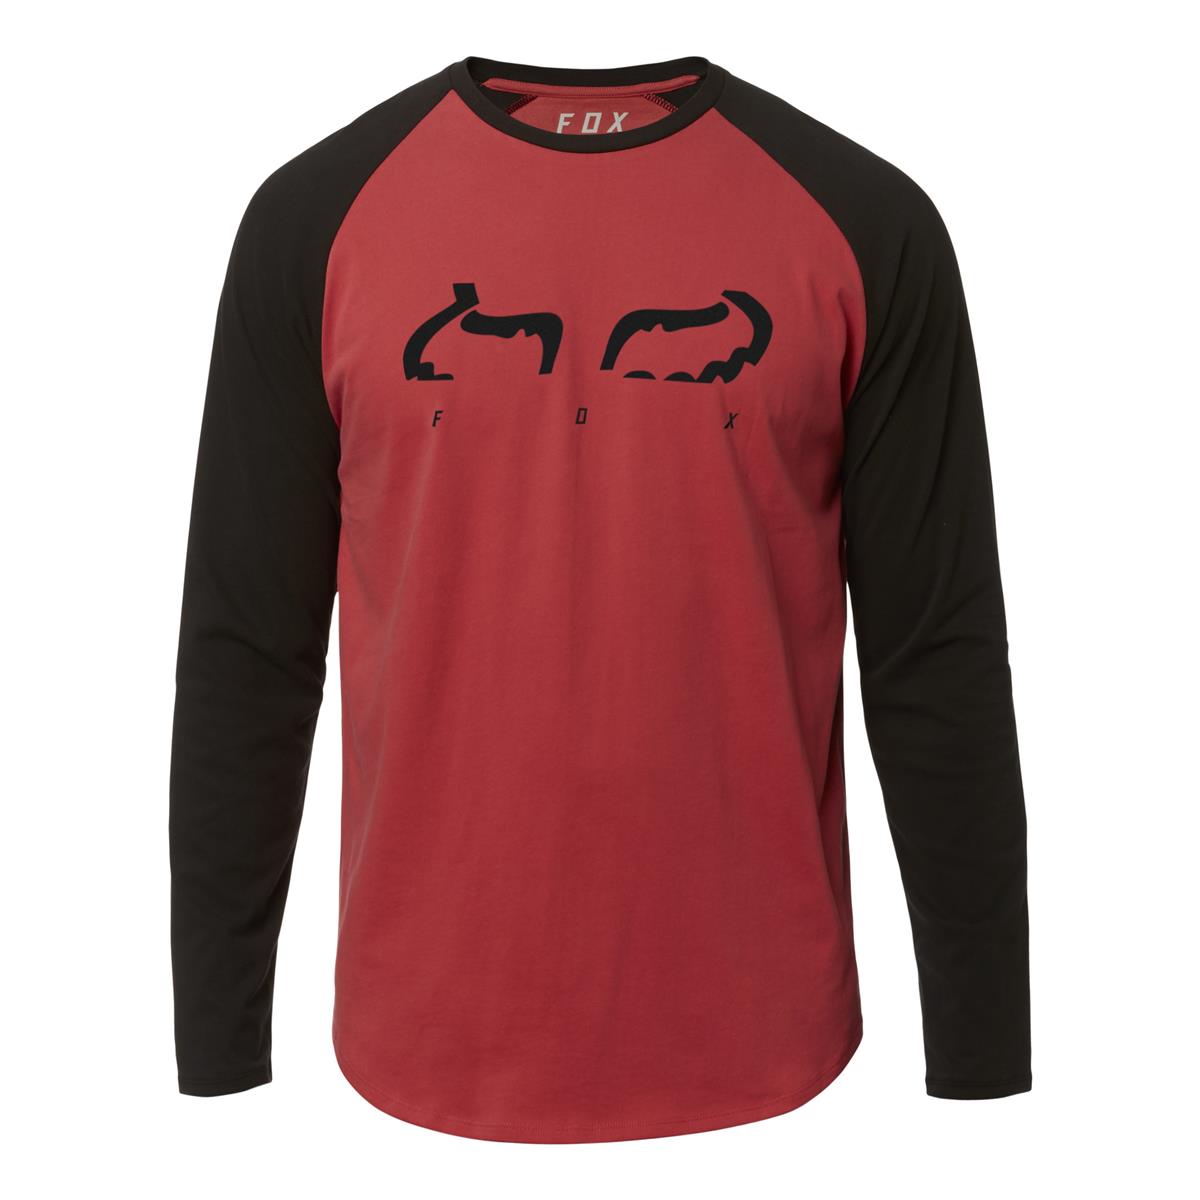 Fox Longsleeve Strap Airline Rio Red